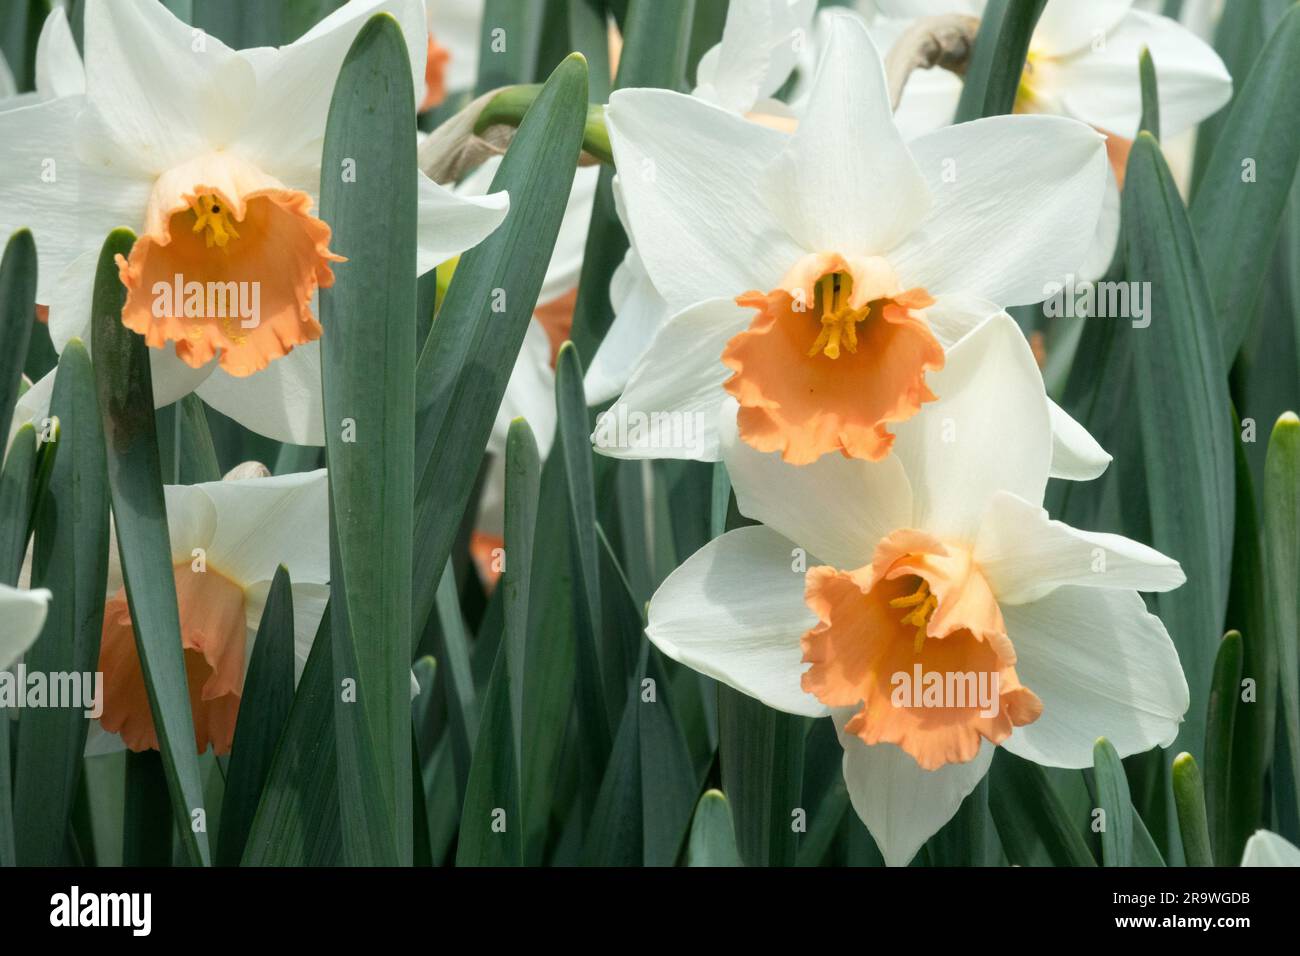 Spring, Flowers, Blooming, Garden, Vernal, Plants, Season, Amaryllidaceae, Perennial, Creamy-white, Daffodils 'Accent' Stock Photo